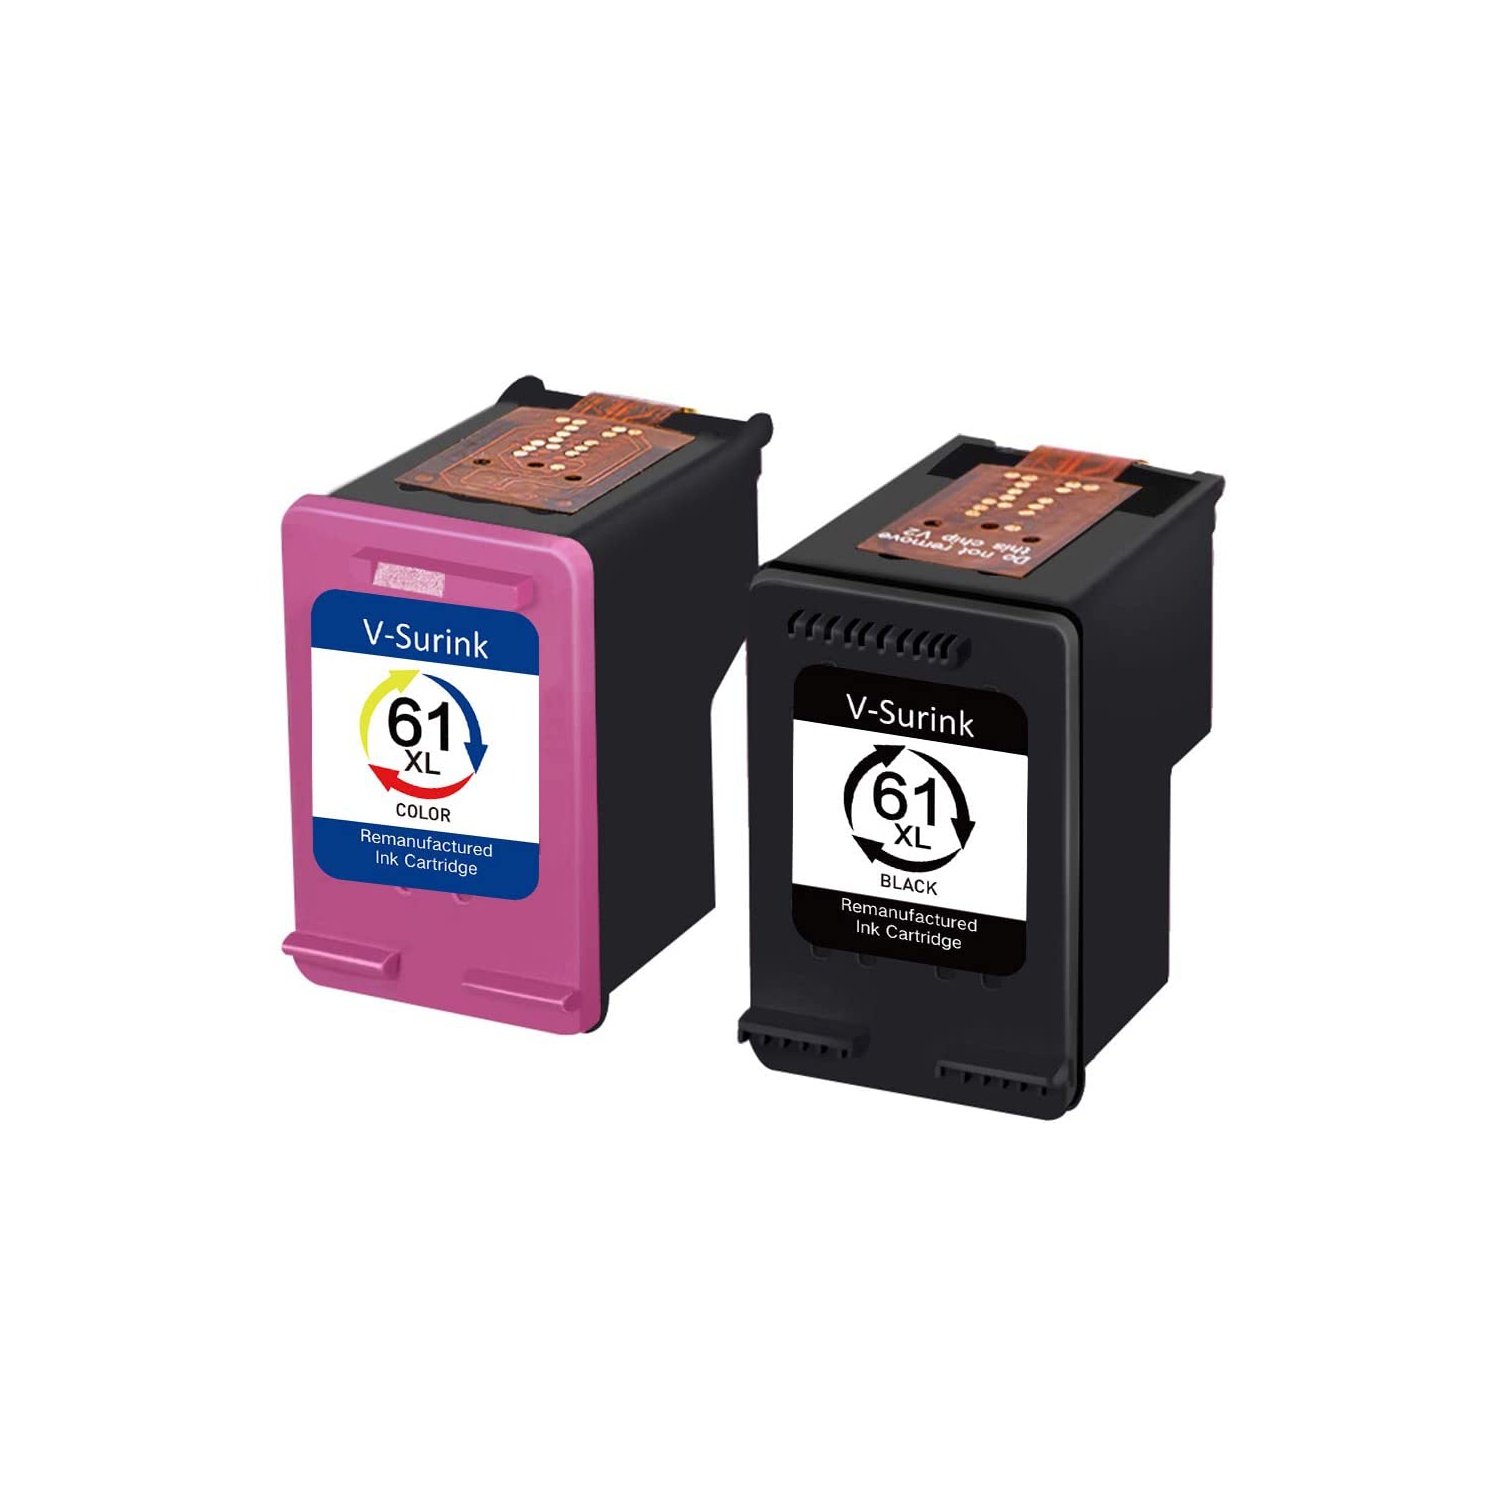 Remanufactured Ink Cartridge with Latest Updated chip for Hp 61 61XL Envy 4500 5530 5534 5535 Deskjet 2540 1000 1010